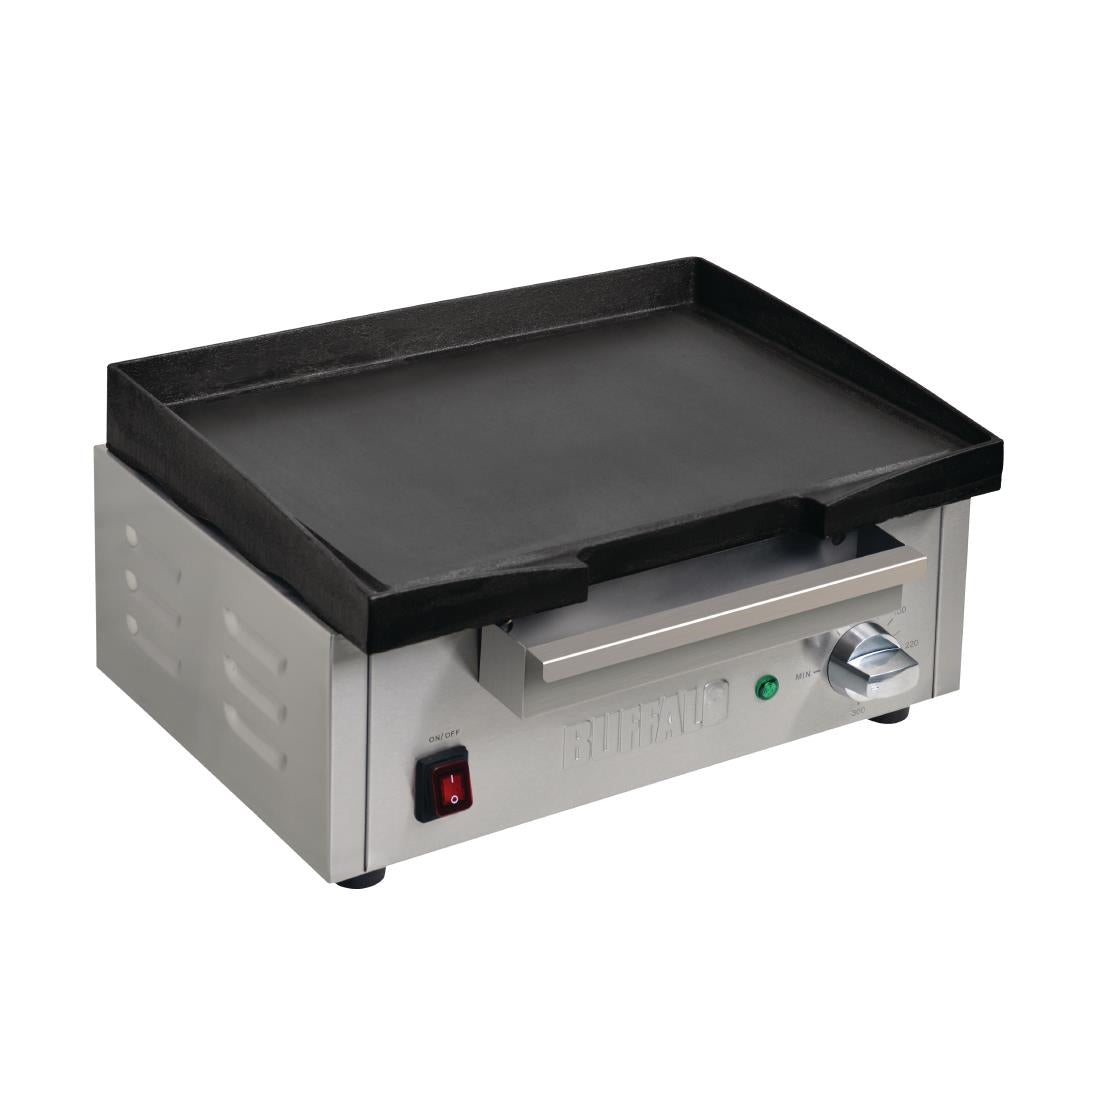 DC900 Buffalo Cast Iron Countertop Griddle JD Catering Equipment Solutions Ltd